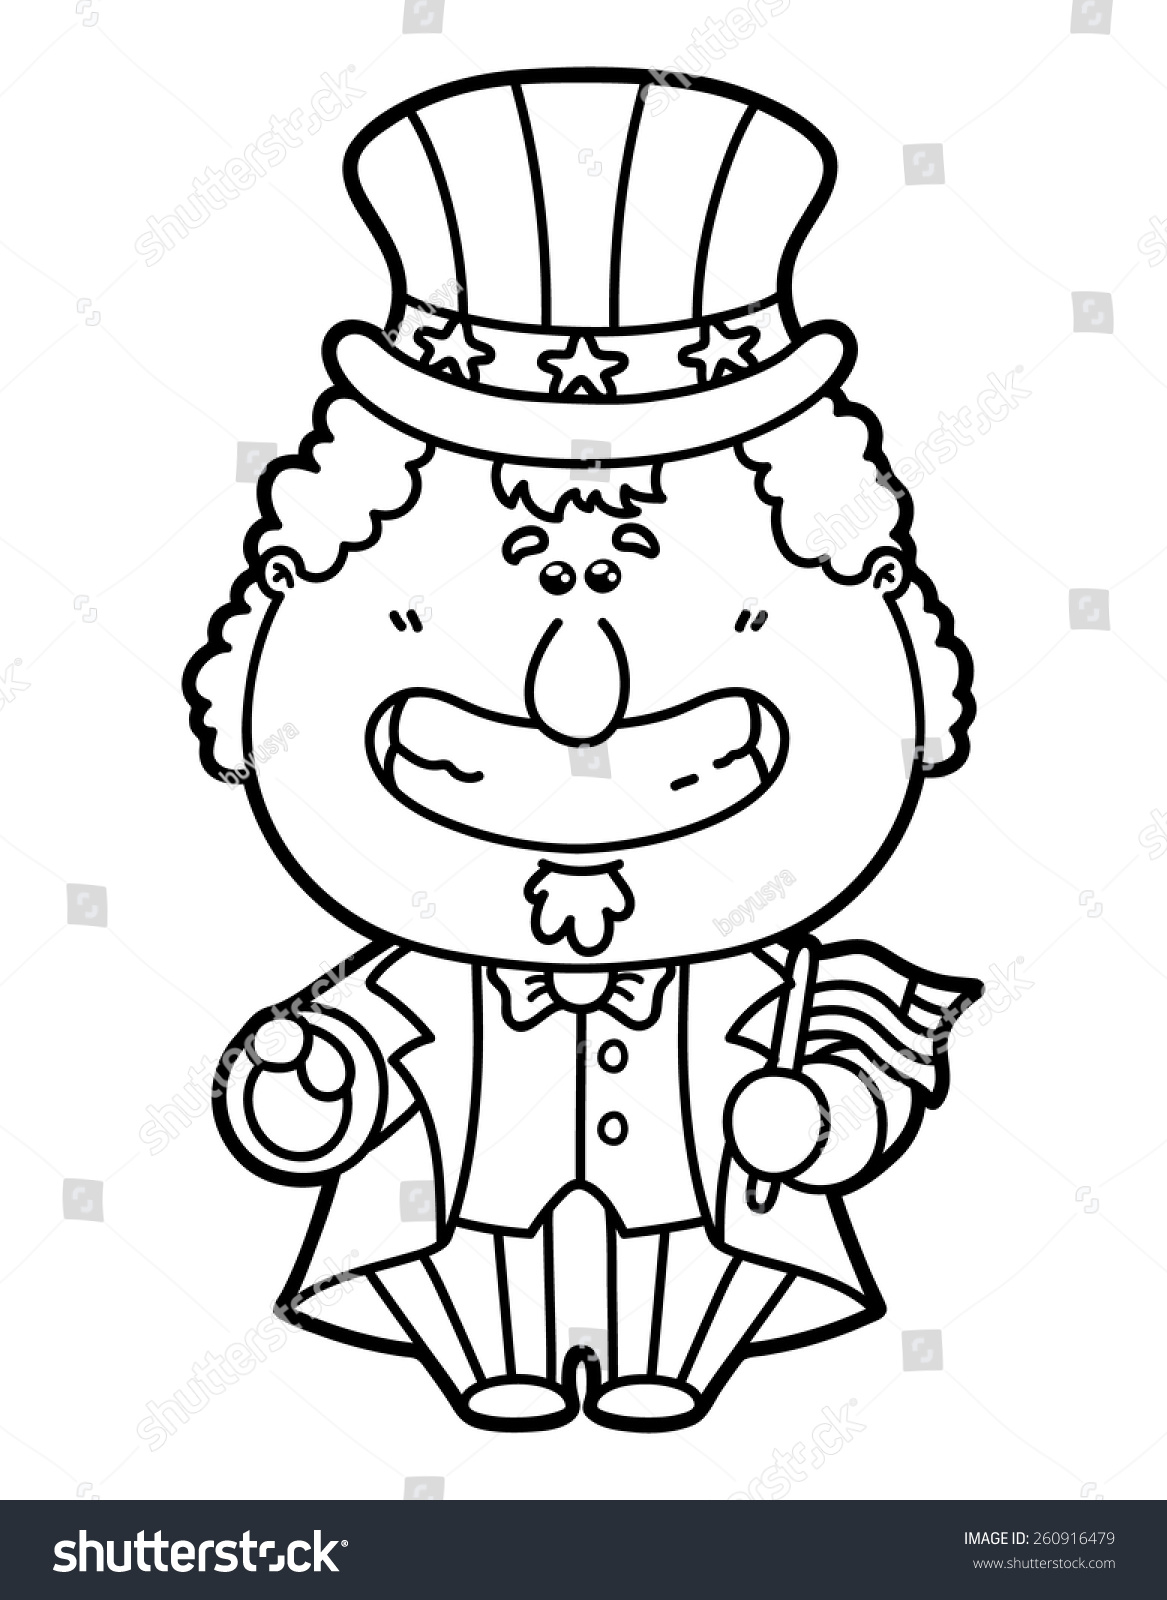 Funny uncle sam vector illustration coloring stock vector royalty free